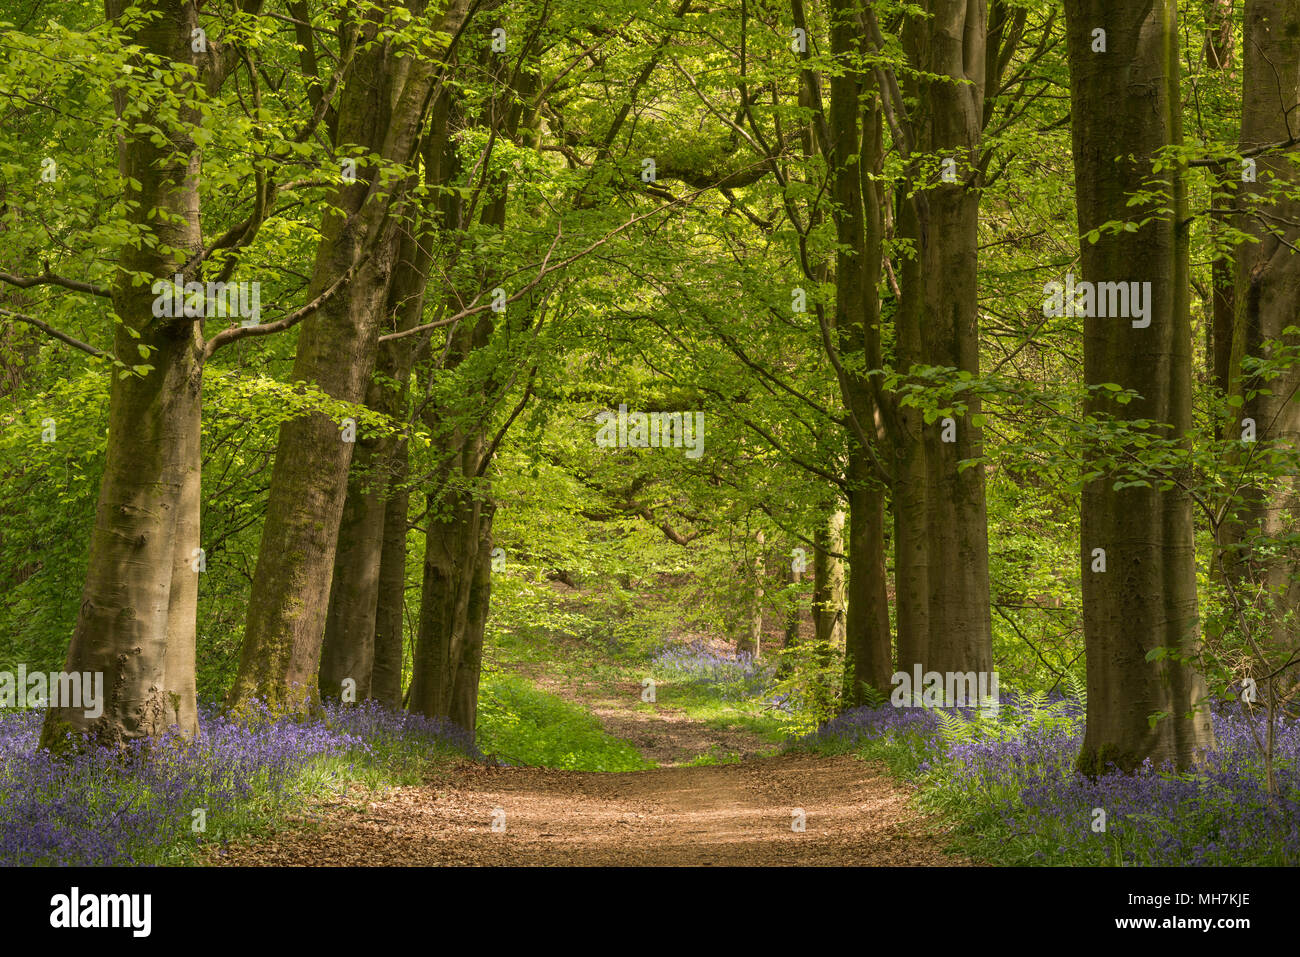 A Hampshire avenue through Beech trees lined with native English Bluebells (Hyacinthoides non-scripta) on a sunny morning in May. Stock Photo